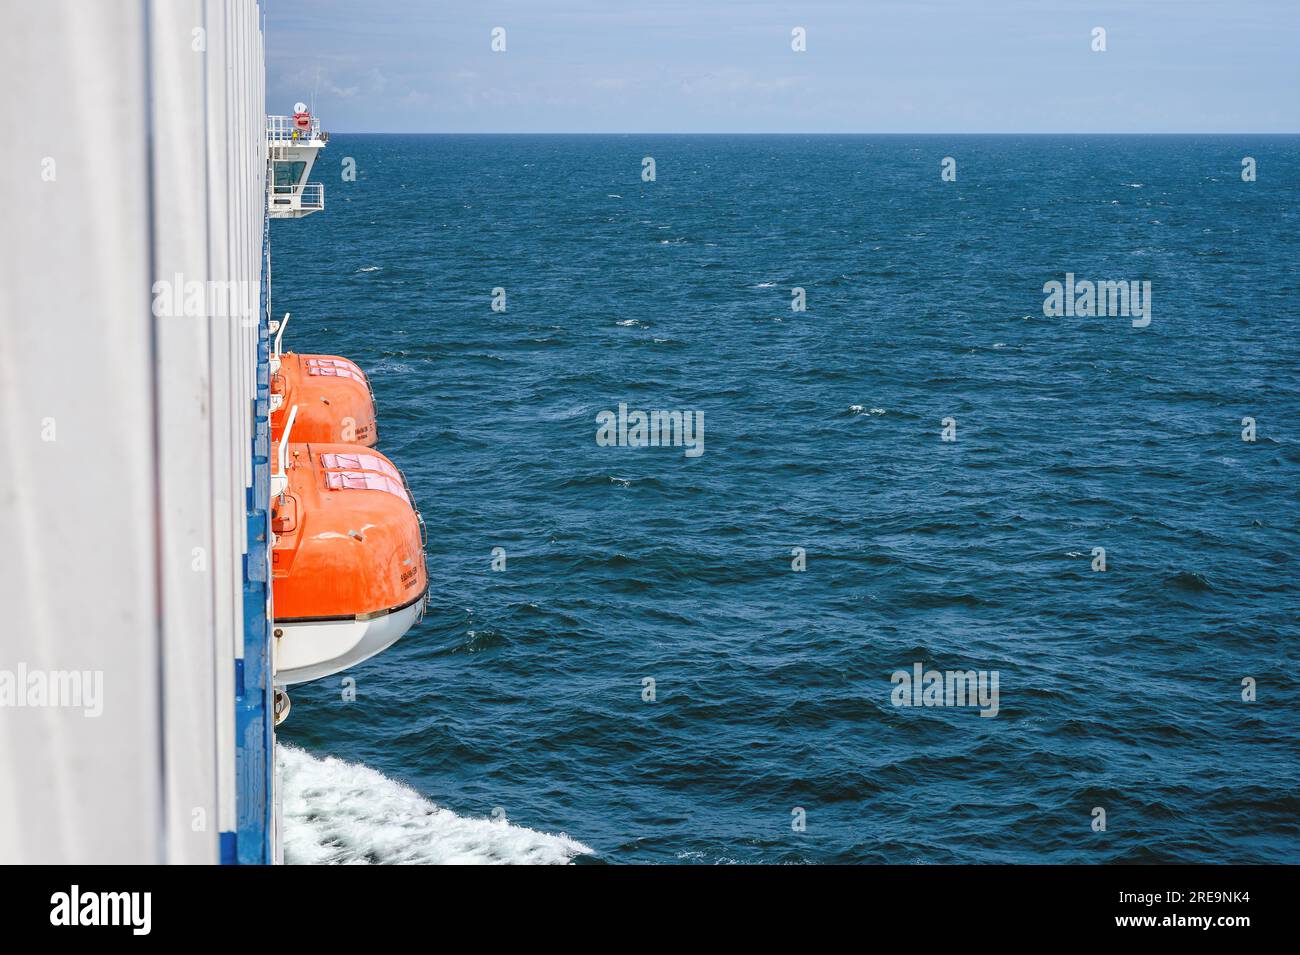 A sea view from onboard the cross-Channel ferry Galicia, showing lifeboats and the bridge. Stock Photo